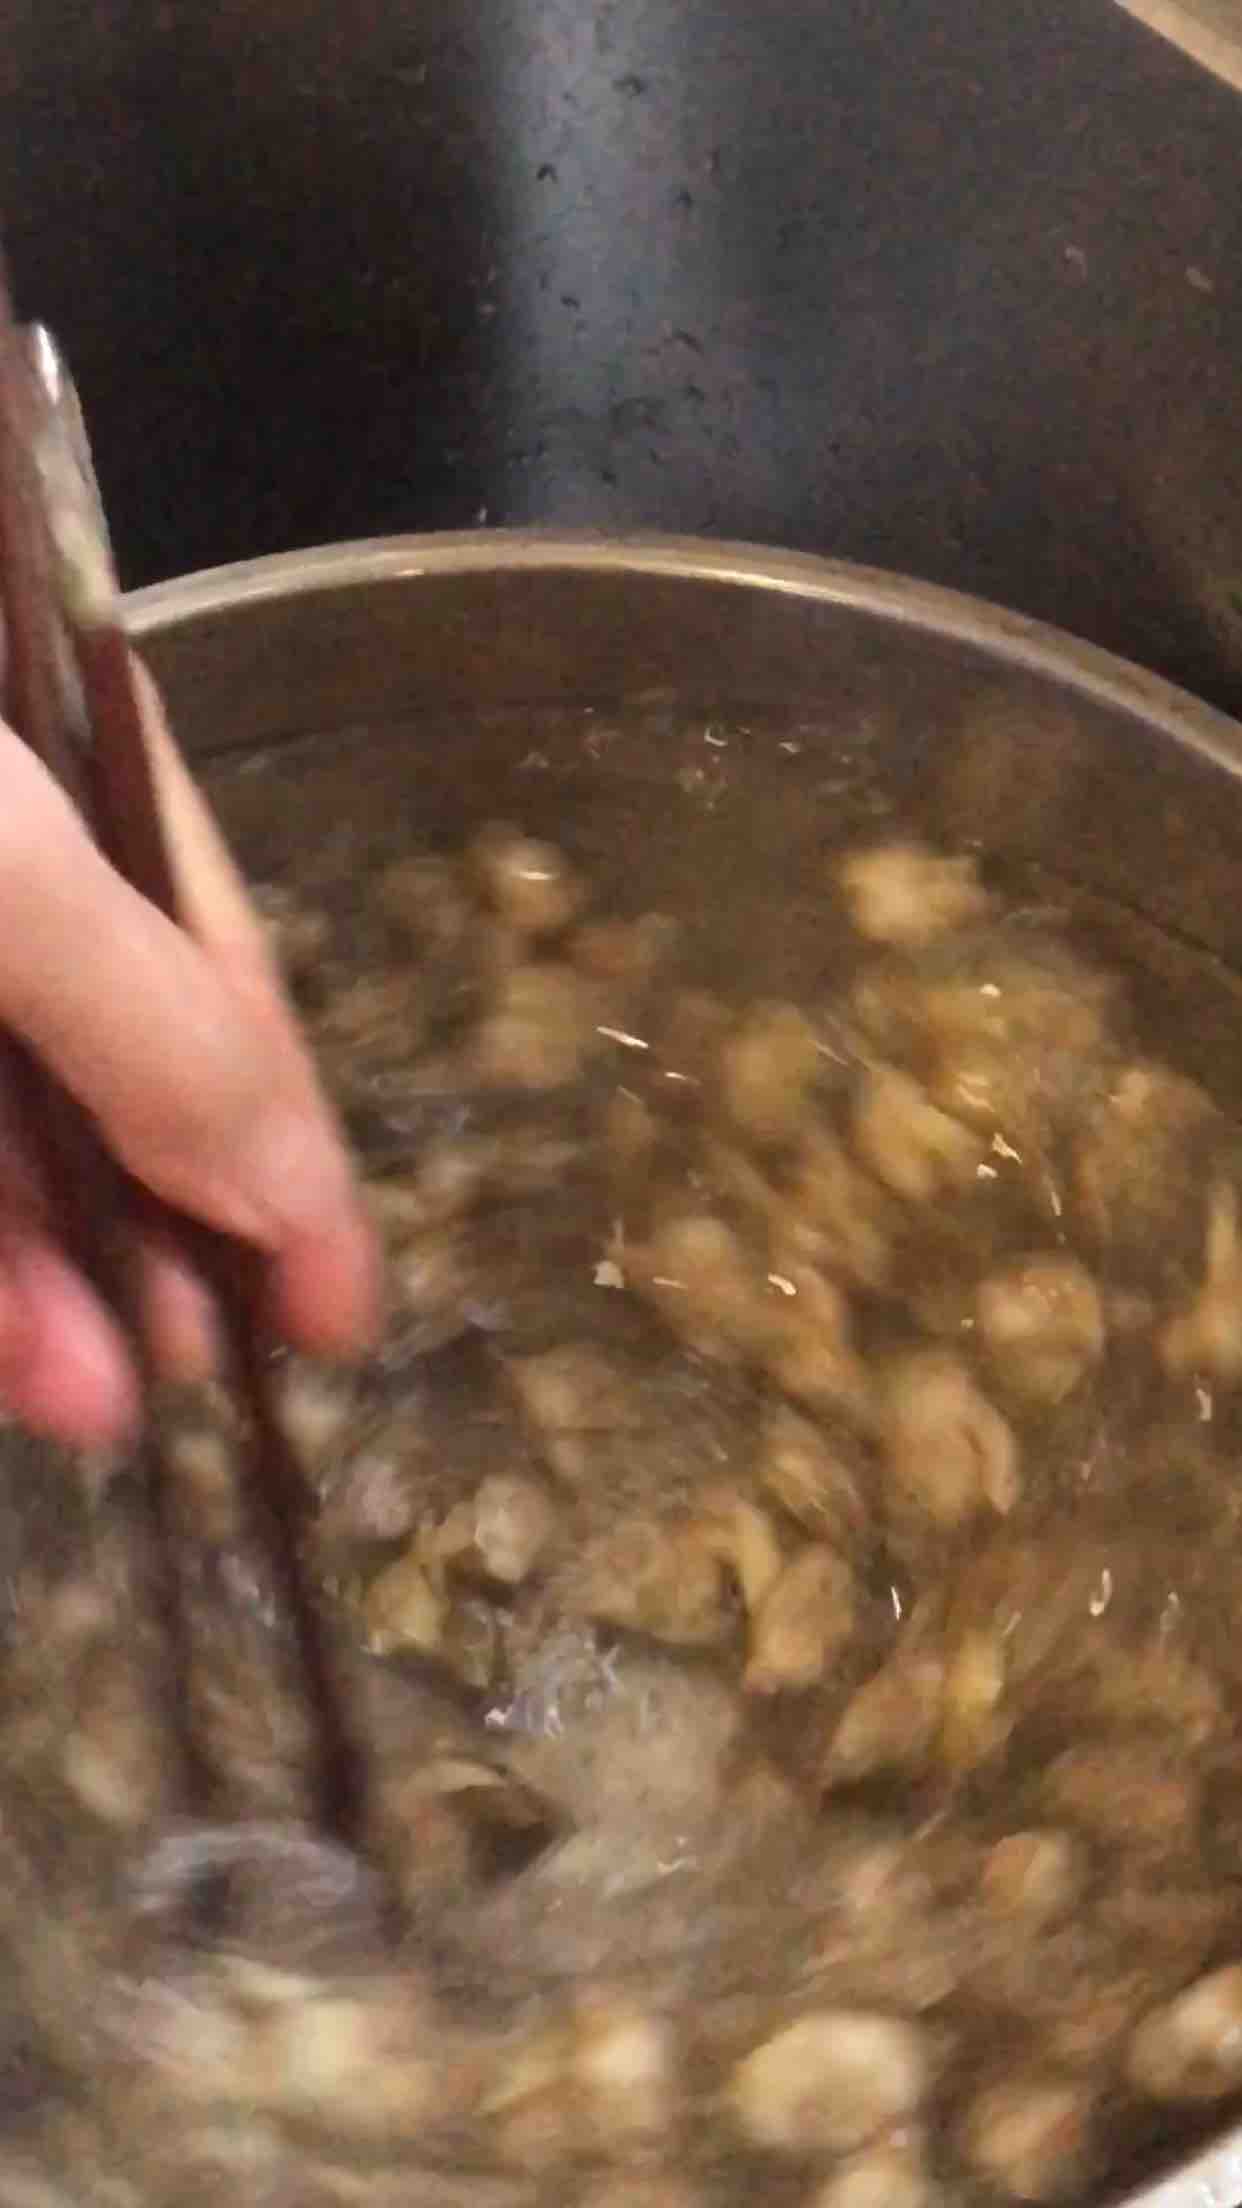 The Correct Way to Clean Clams recipe